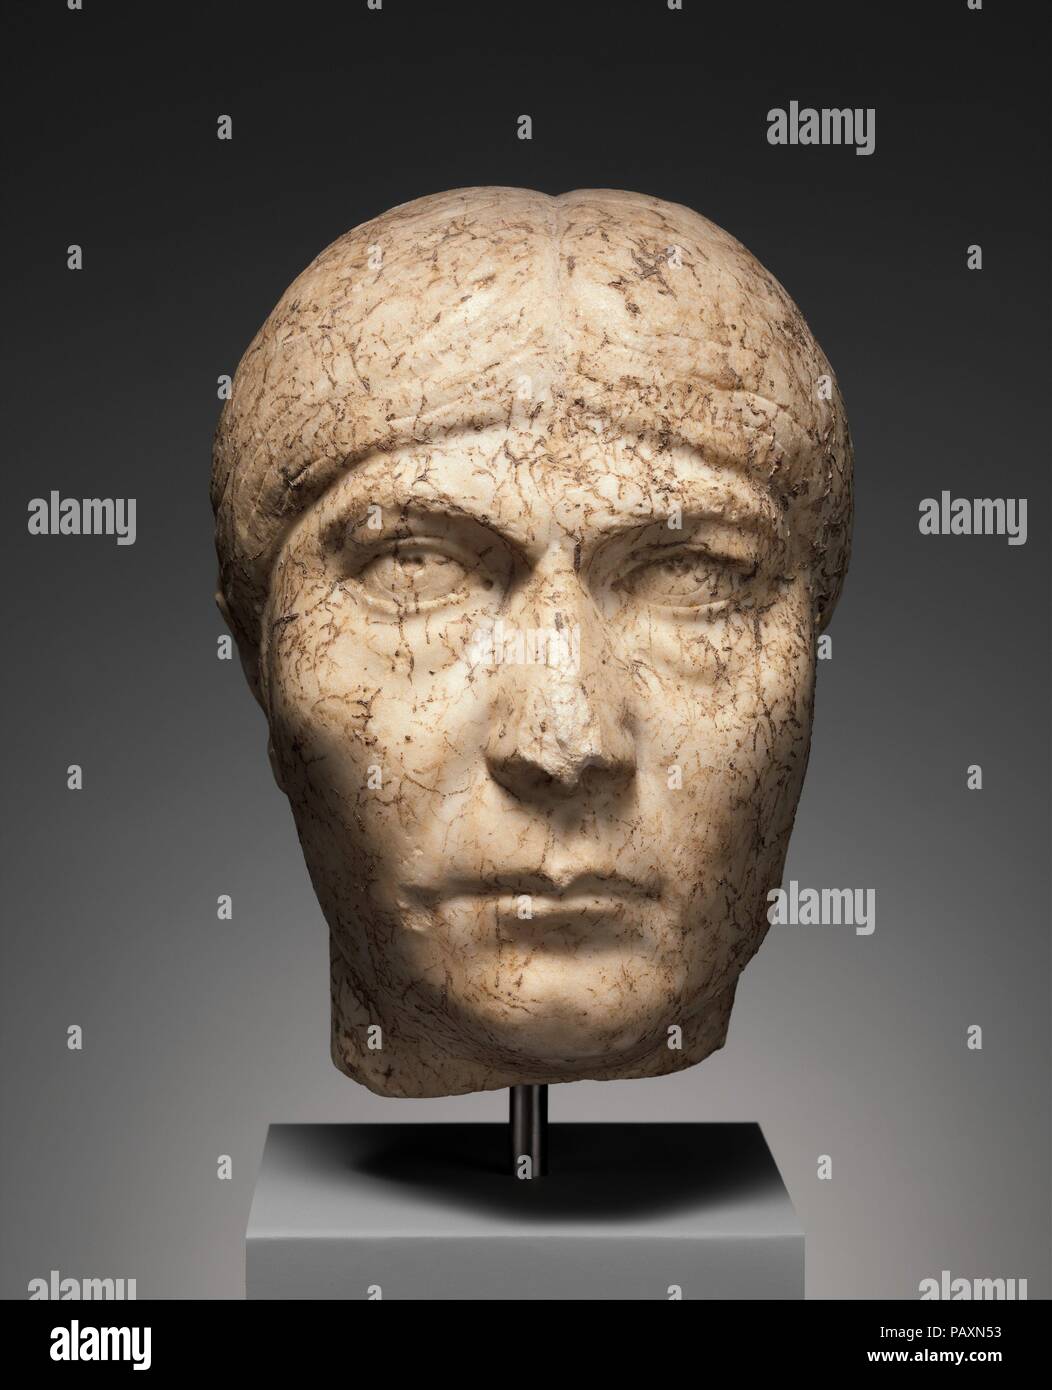 Marble portrait head of a woman. Culture: Roman. Dimensions: Overall: 8 5/8 × 5 3/4 × 6 7/8 in. (21.9 × 14.6 × 17.5 cm). Date: early 3rd century A.D..  The portrait is one of great character, reflecting the personality and physical appearance of the subject. It also illustrates the continuing practice of private individuals of following the fashions set by the imperial court; under the Severan dynasty (A.D. 193-235) hairstyles for both men and women were very restrained in comparison with earlier styles. In addition, the carving at the back of the head indicates that a separate piece of marble Stock Photo